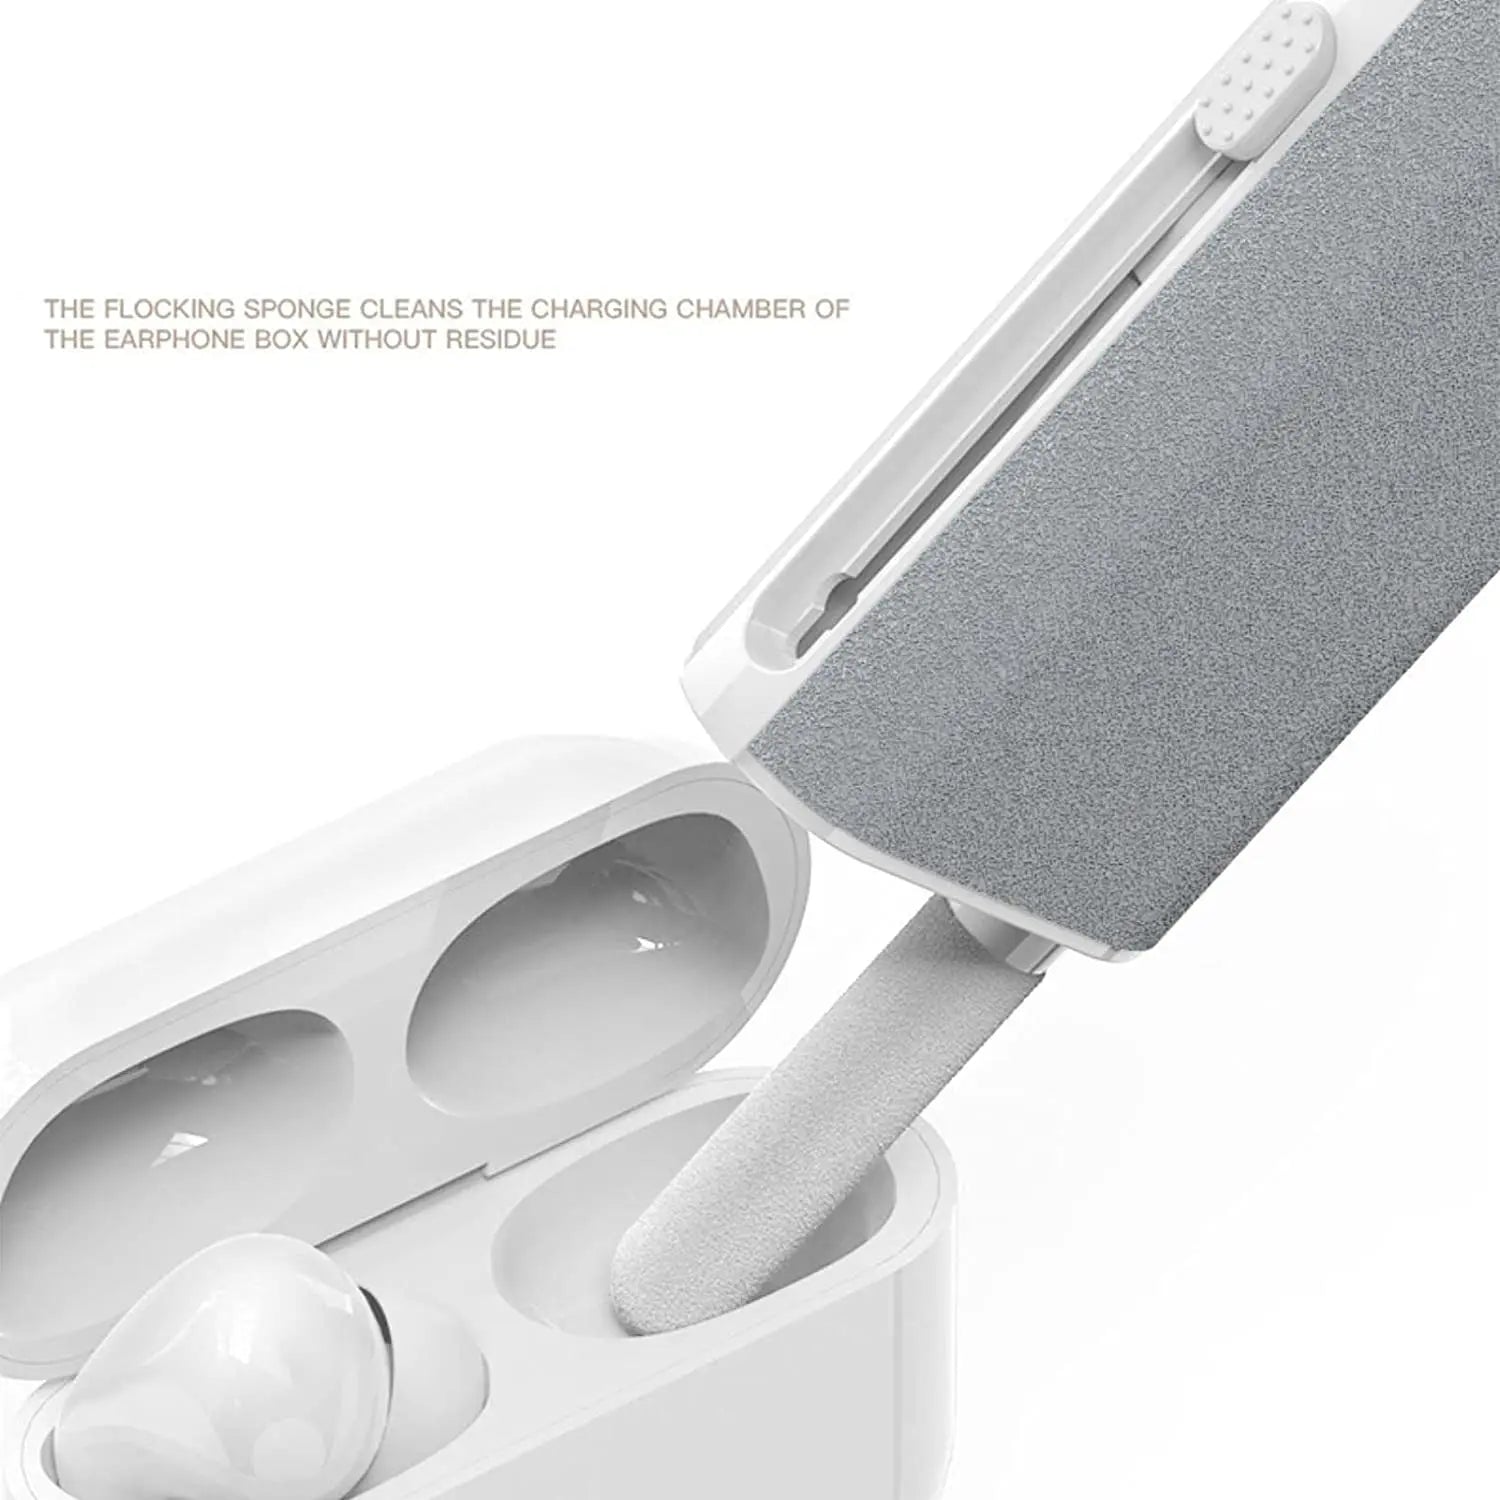 5-in-1 Device Cleaner Kit for Airpod Pro and Devices